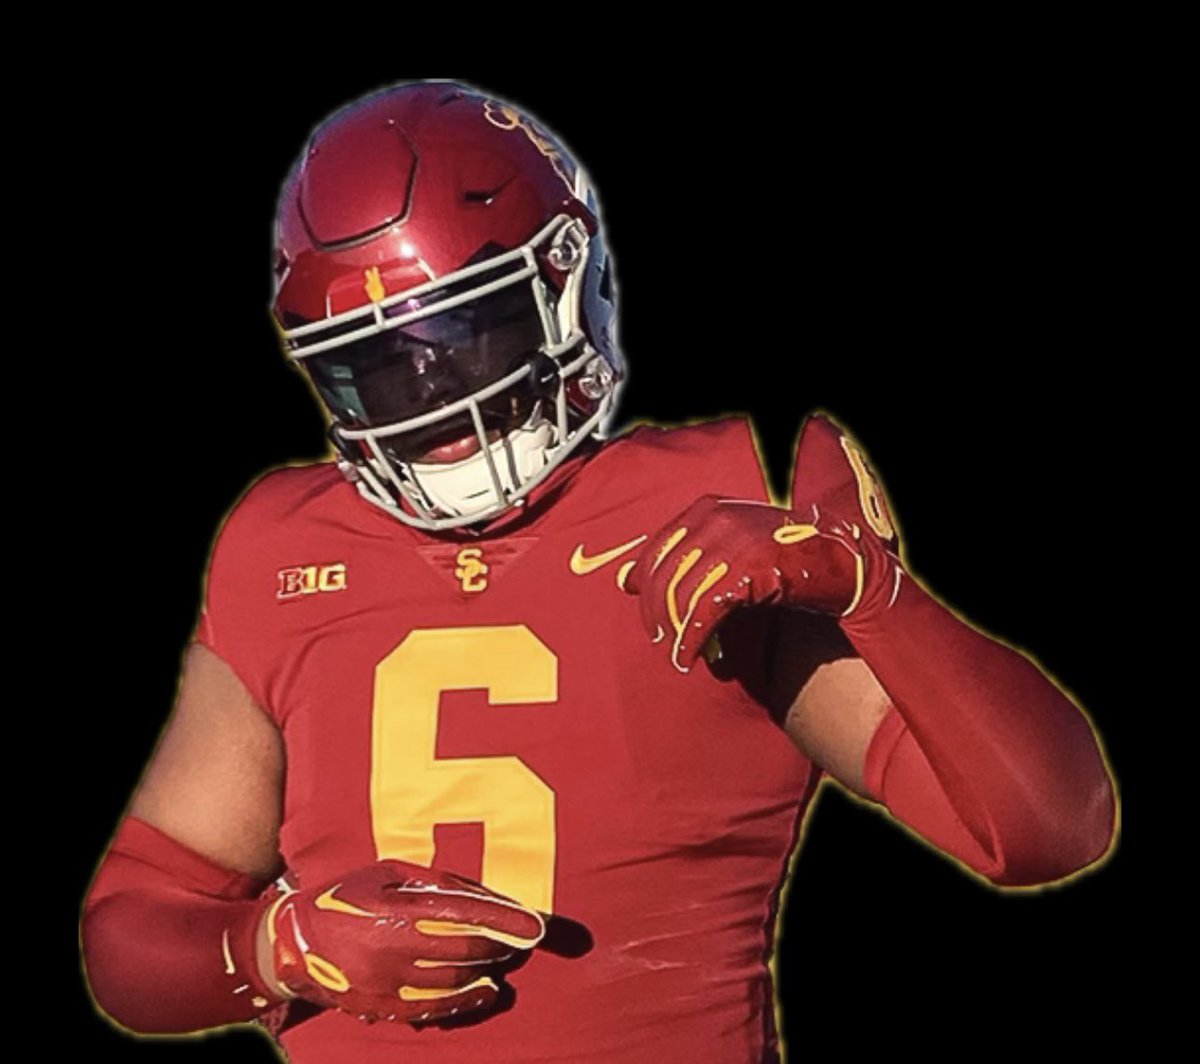 Incoming freshman Carlon Jones reminds me of LA Rams DL Kobi Turner, considering they both have an identical frame.

The young Trojan defensive linemen will benefit greatly from having @Coach_Henny showing them NFL DL drills from day 1🔥🔥

#FightOn ✌🏿
@uscfb 
#DAWGWORK 🐕